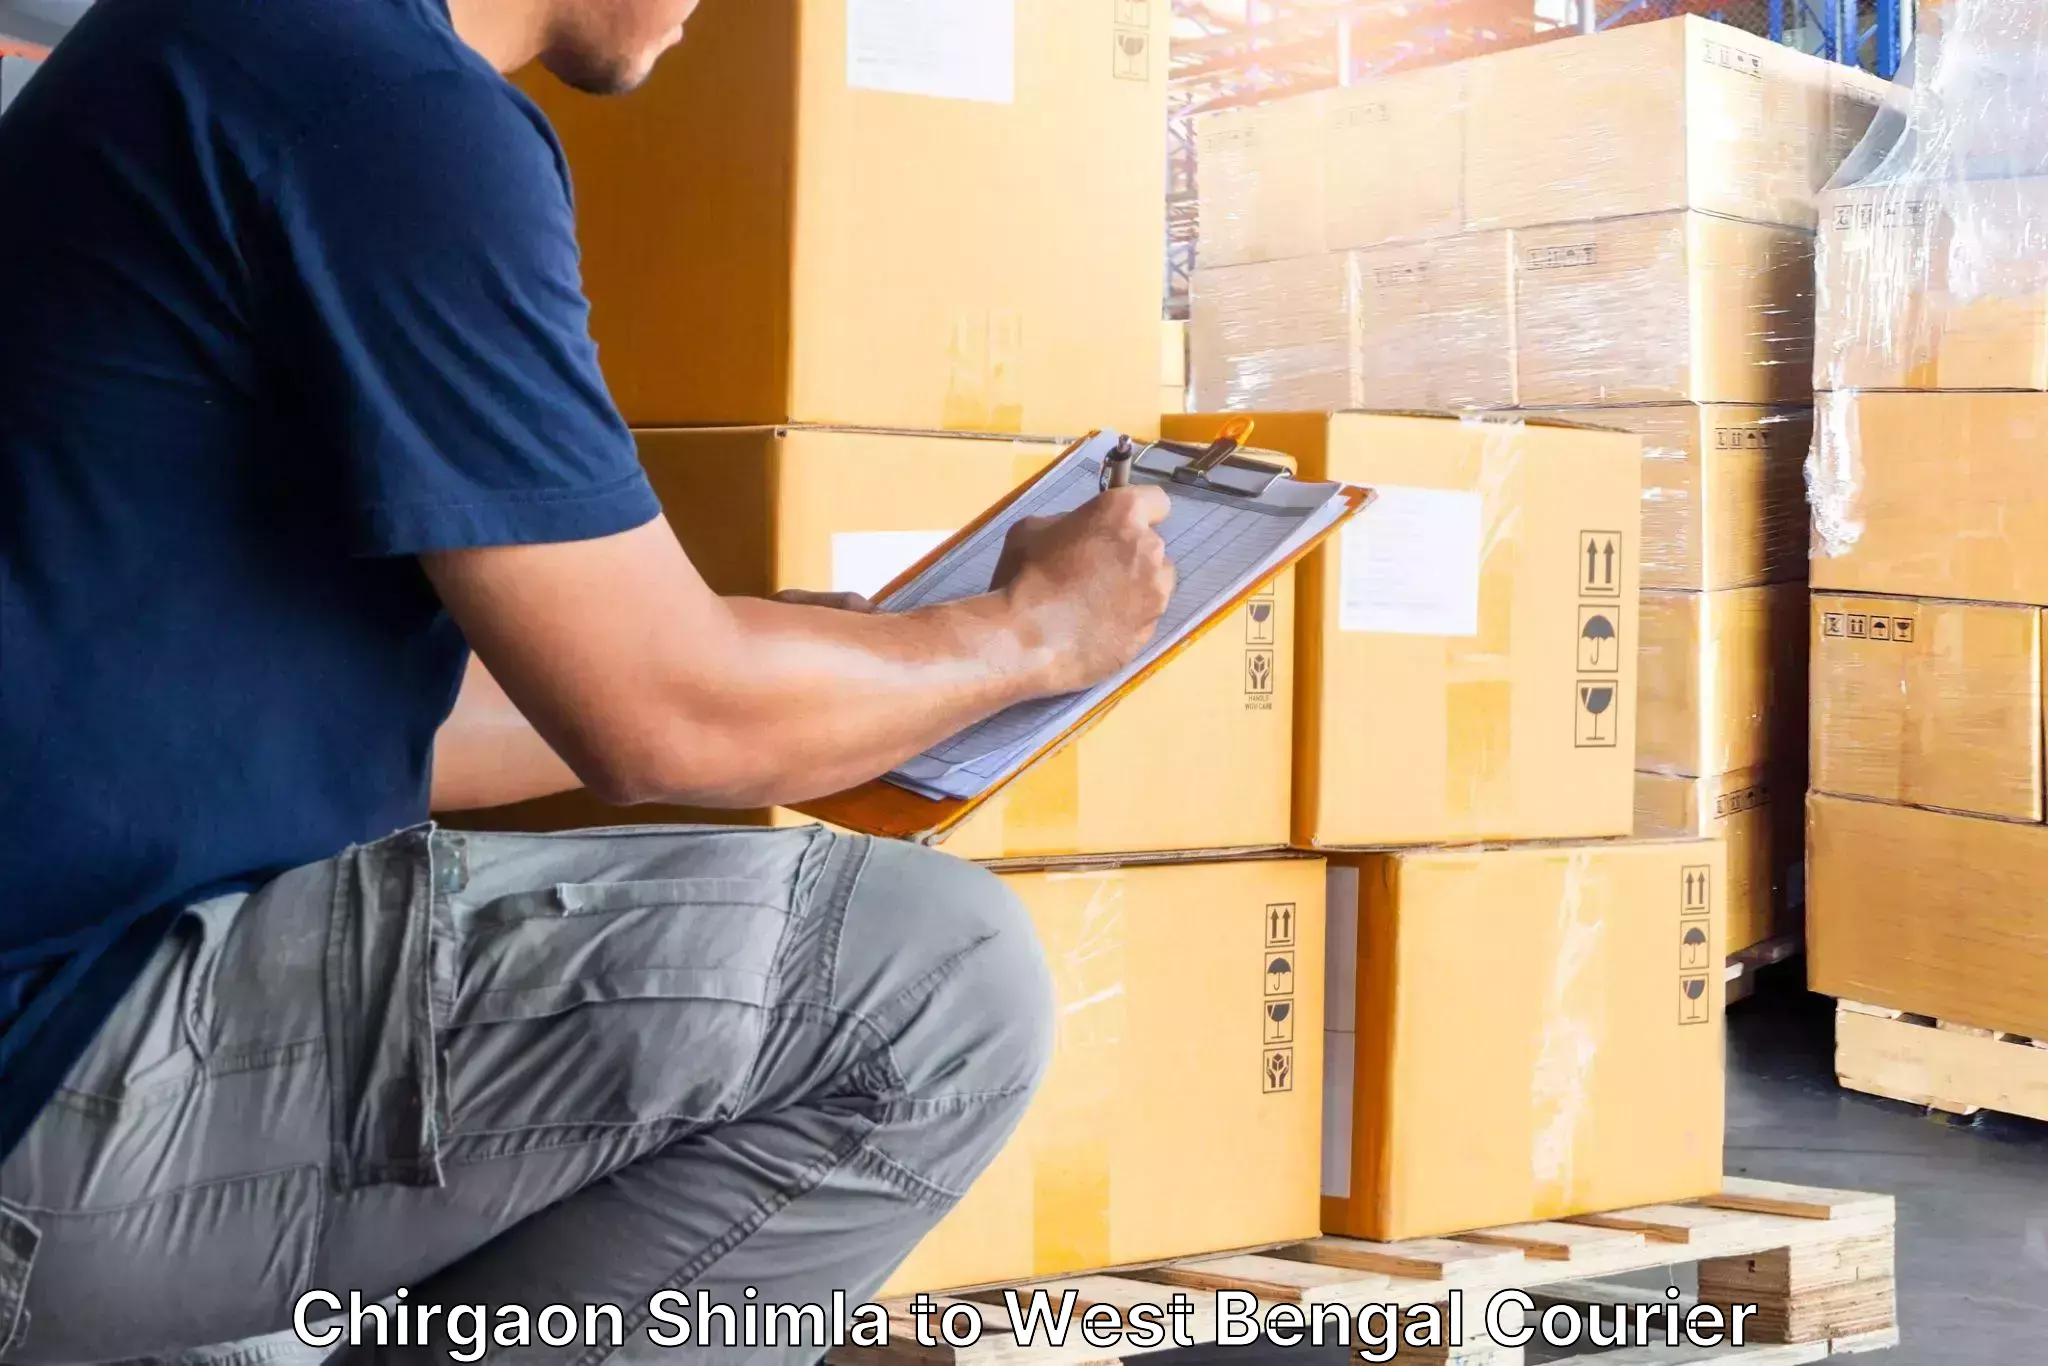 Dependable moving services Chirgaon Shimla to Durgapur